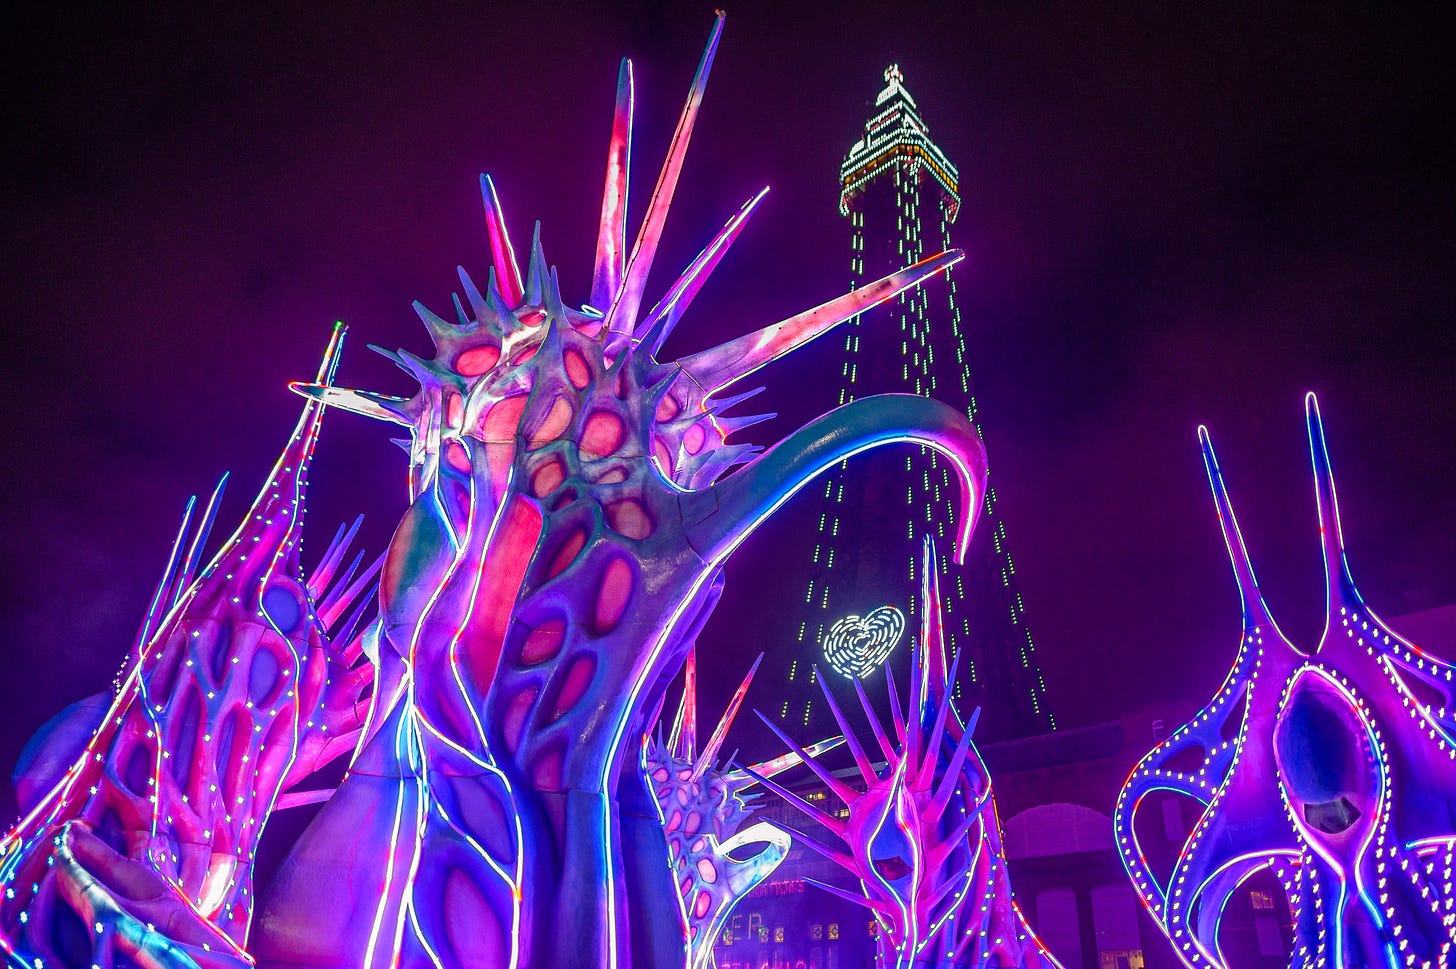 Large monstrous creations are illuminated in purple colours against the backdrop of Blackpool Tower.